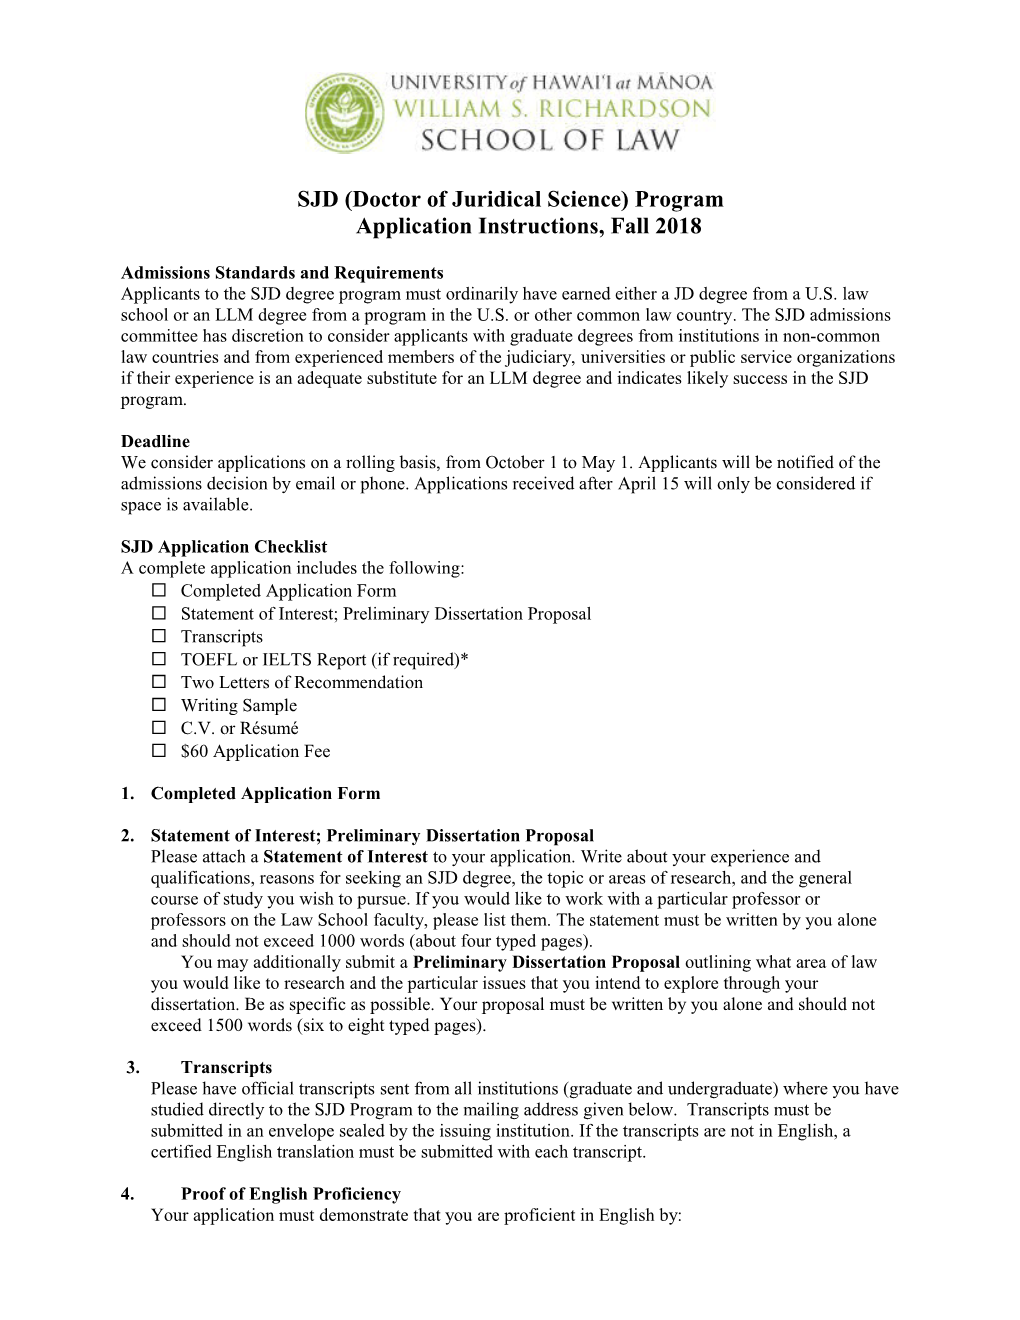 SJD (Doctor of Juridical Science) Programapplication Instructions, Fall 2018